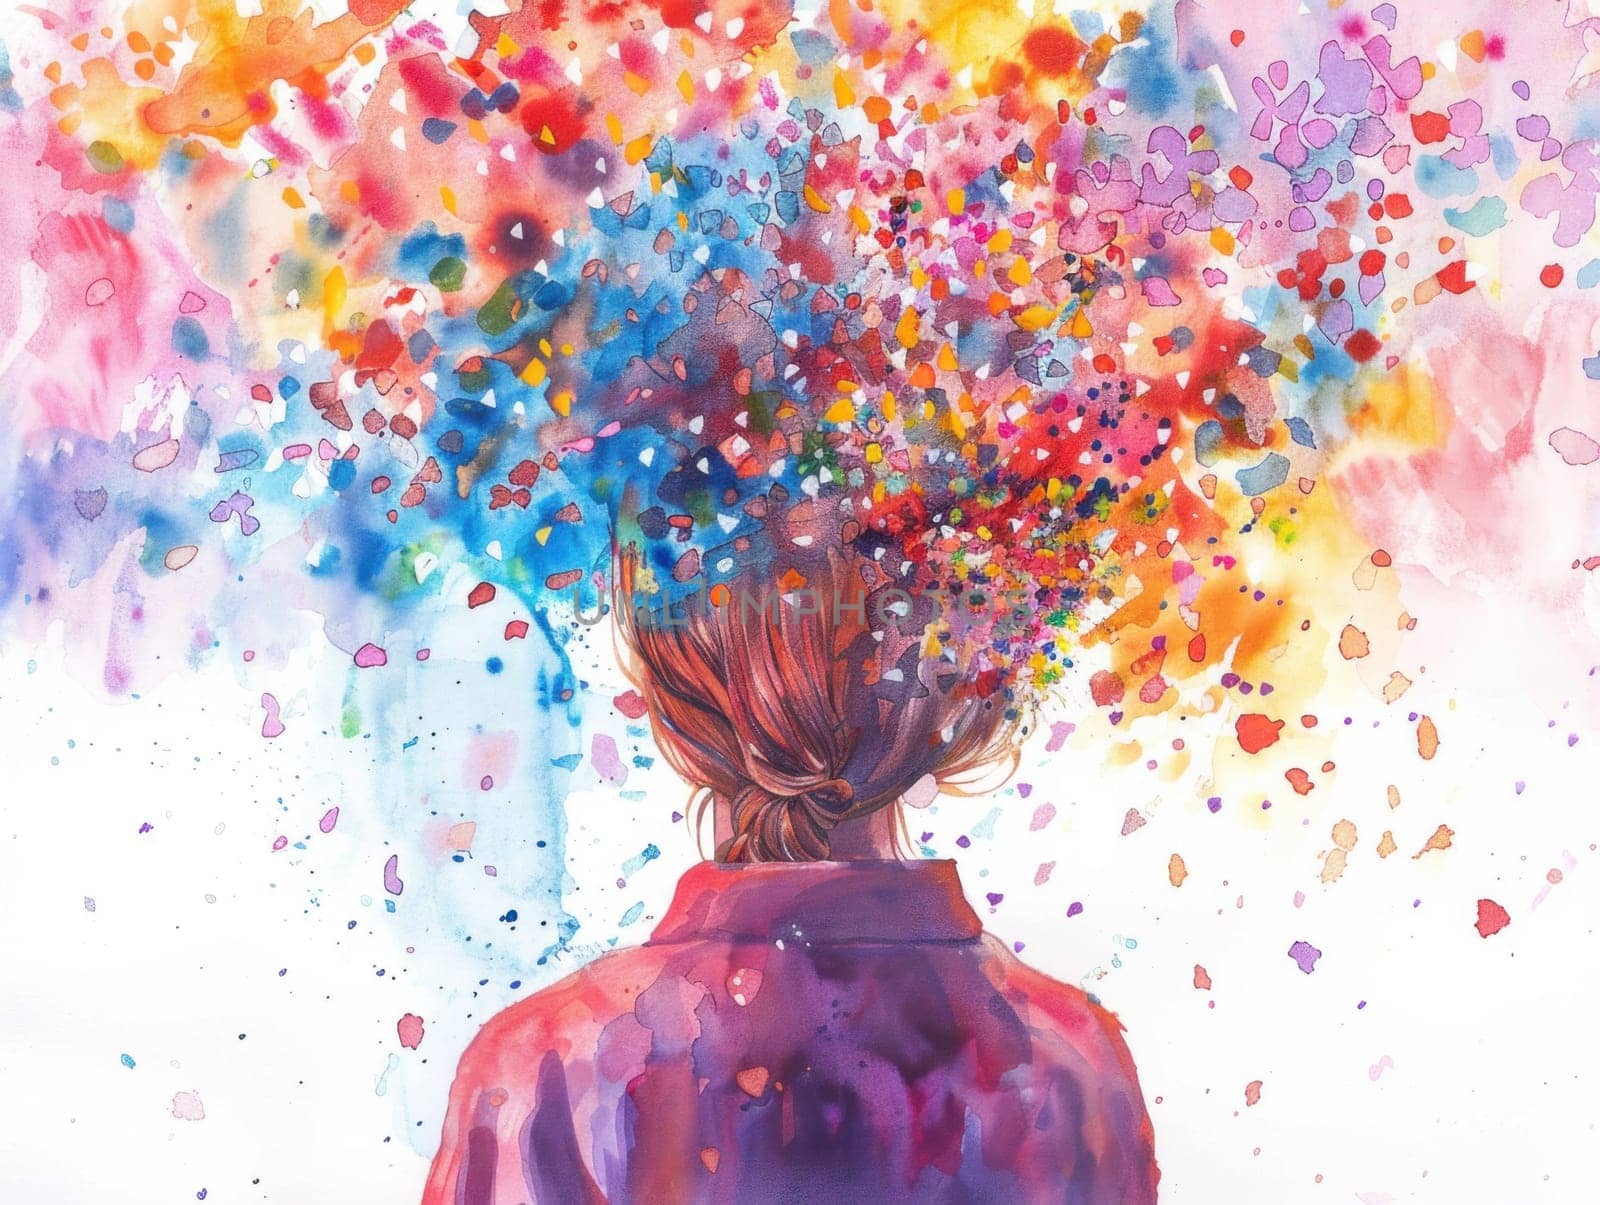 Colorful celebration woman's mind exploding with confetti and hair transformed into a rainbow art installation symbolizing joy and creativity